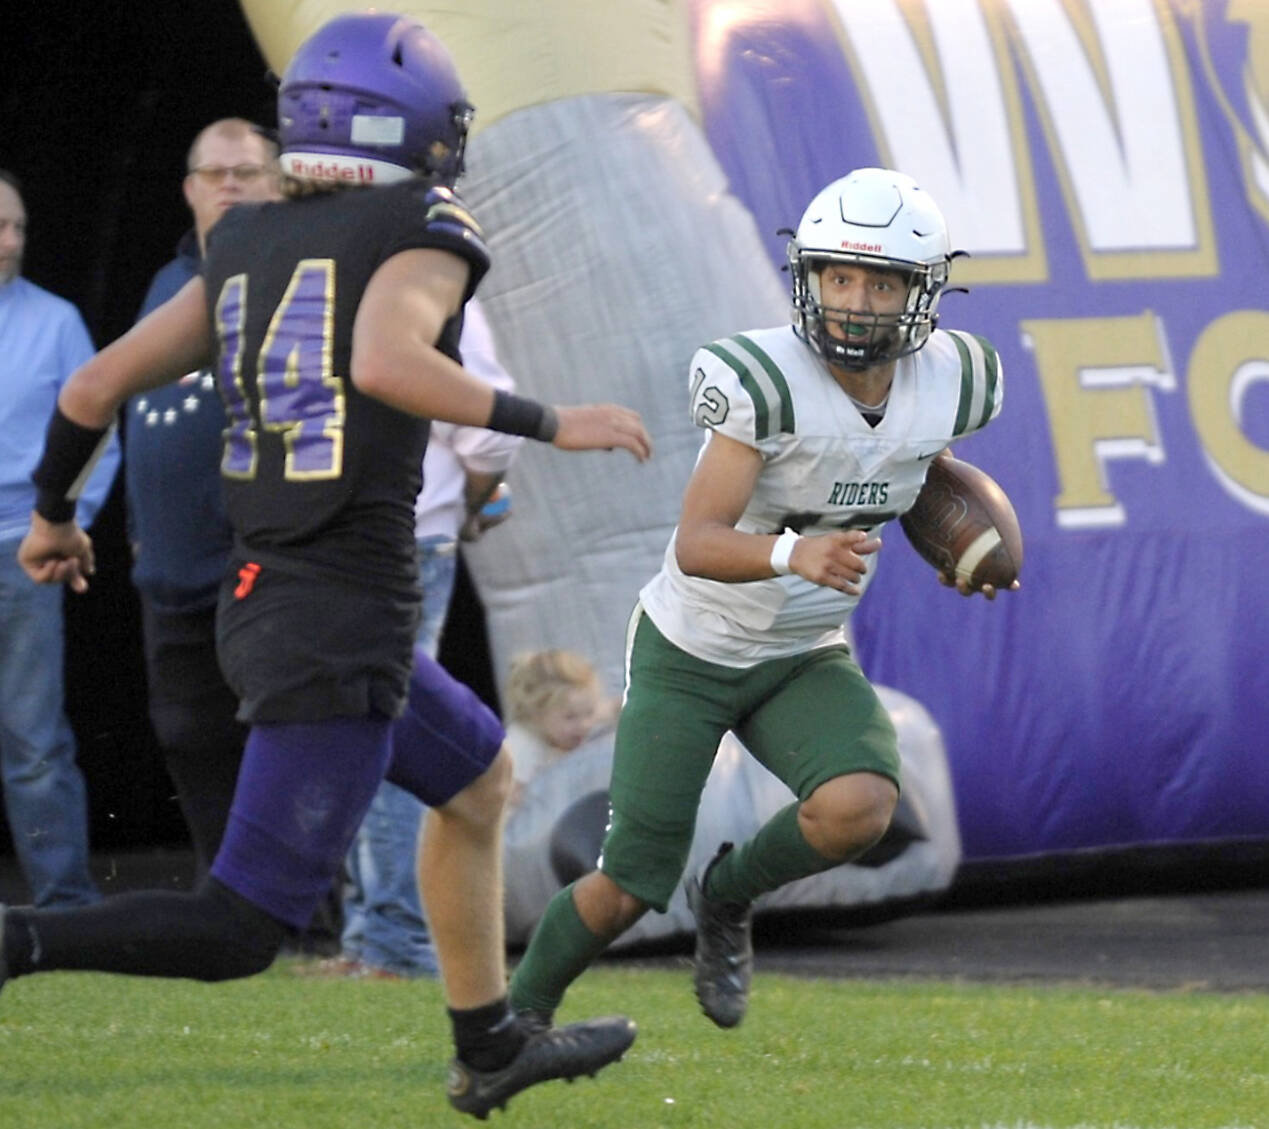 Port Angeles’ Kason Albaugh (12) runs against Sequim’s Zeke Schmadeke (14) in the Rainshadow Rumble game in Sequim on Friday night. The Roughriders scored 27 points in the fourth quarter to win 37-10. (Michael Dashiell/Olympic Peninsula News Group)